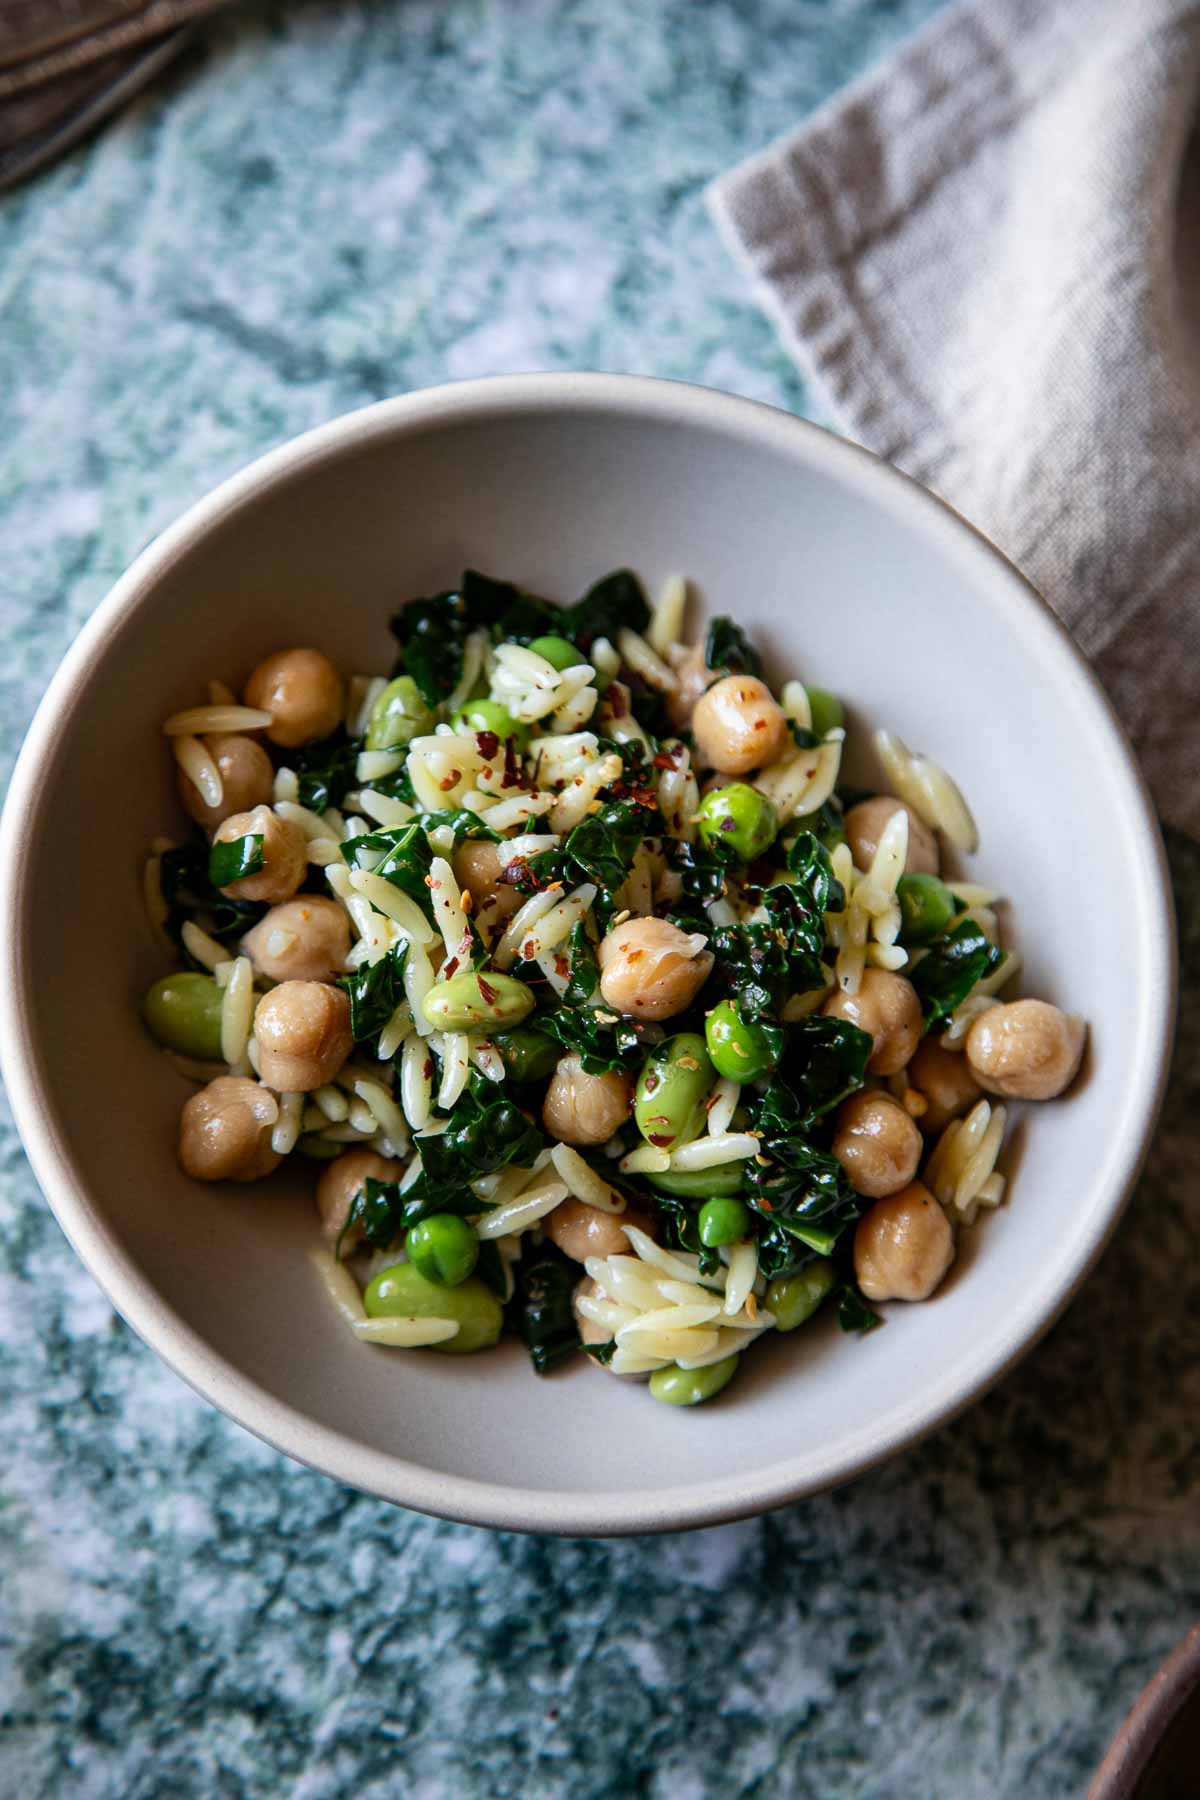 Orzo, pasta, spinach, and garbanzo beans on light pink plate